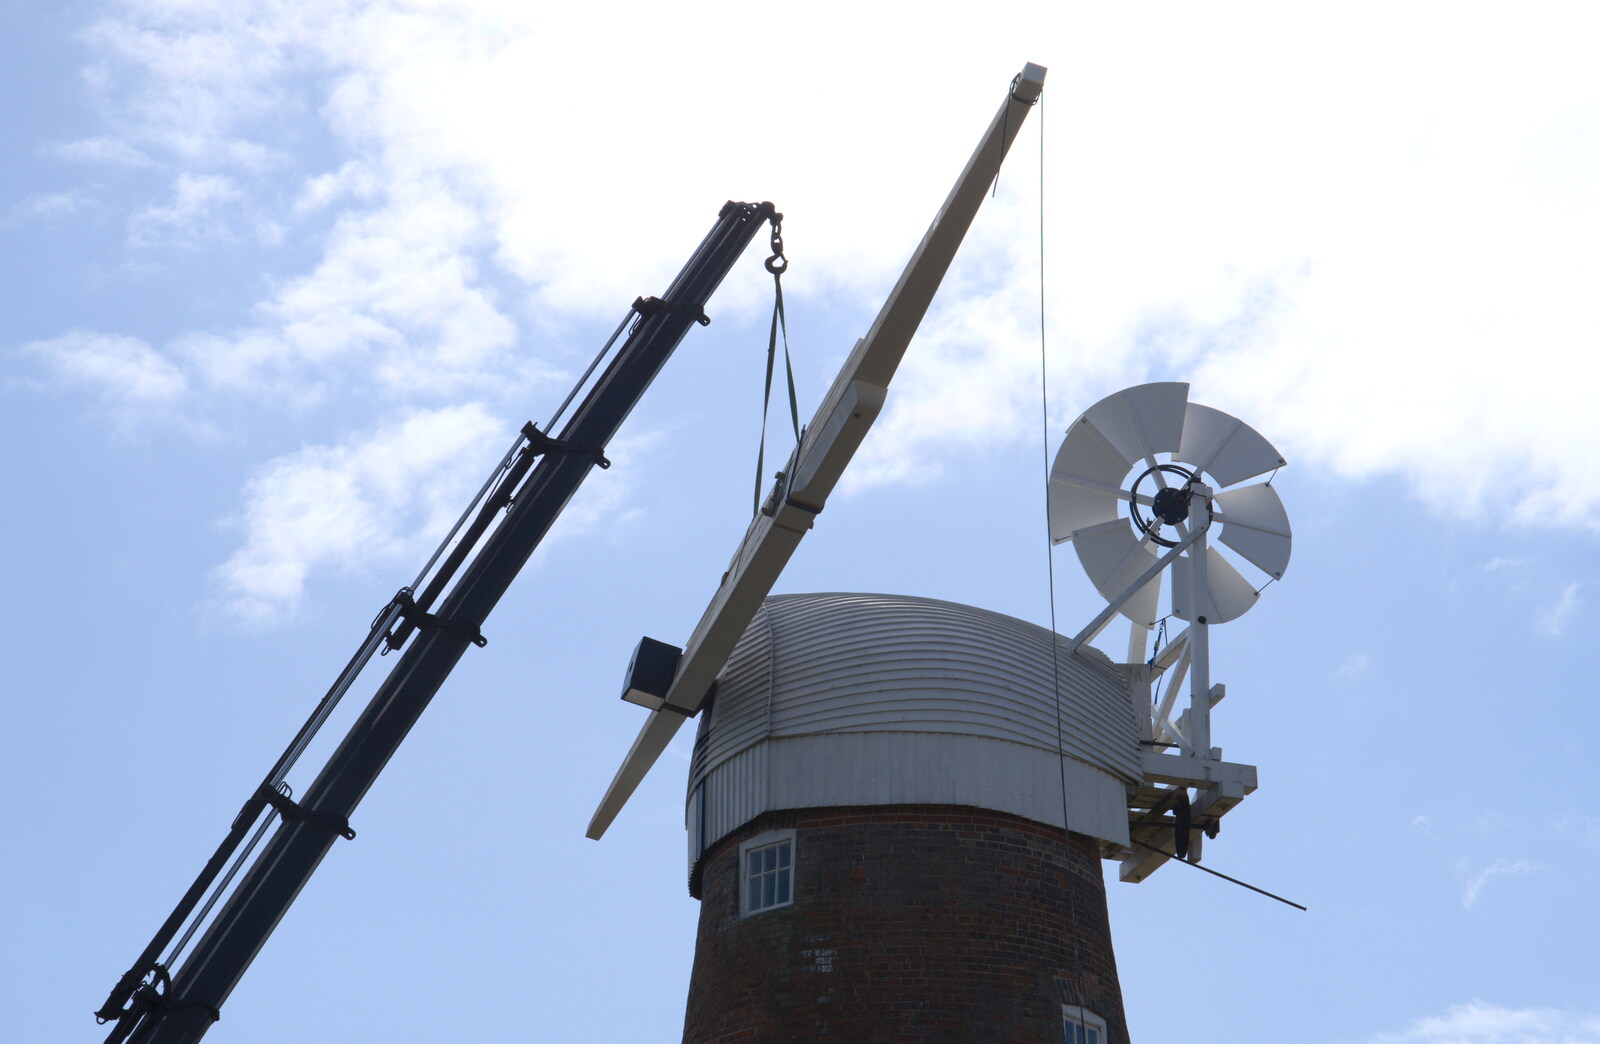 The arm is fitted to the post from A Sail Fitting, Billingford Windmill, Billingford, Norfolk - 20th August 2020